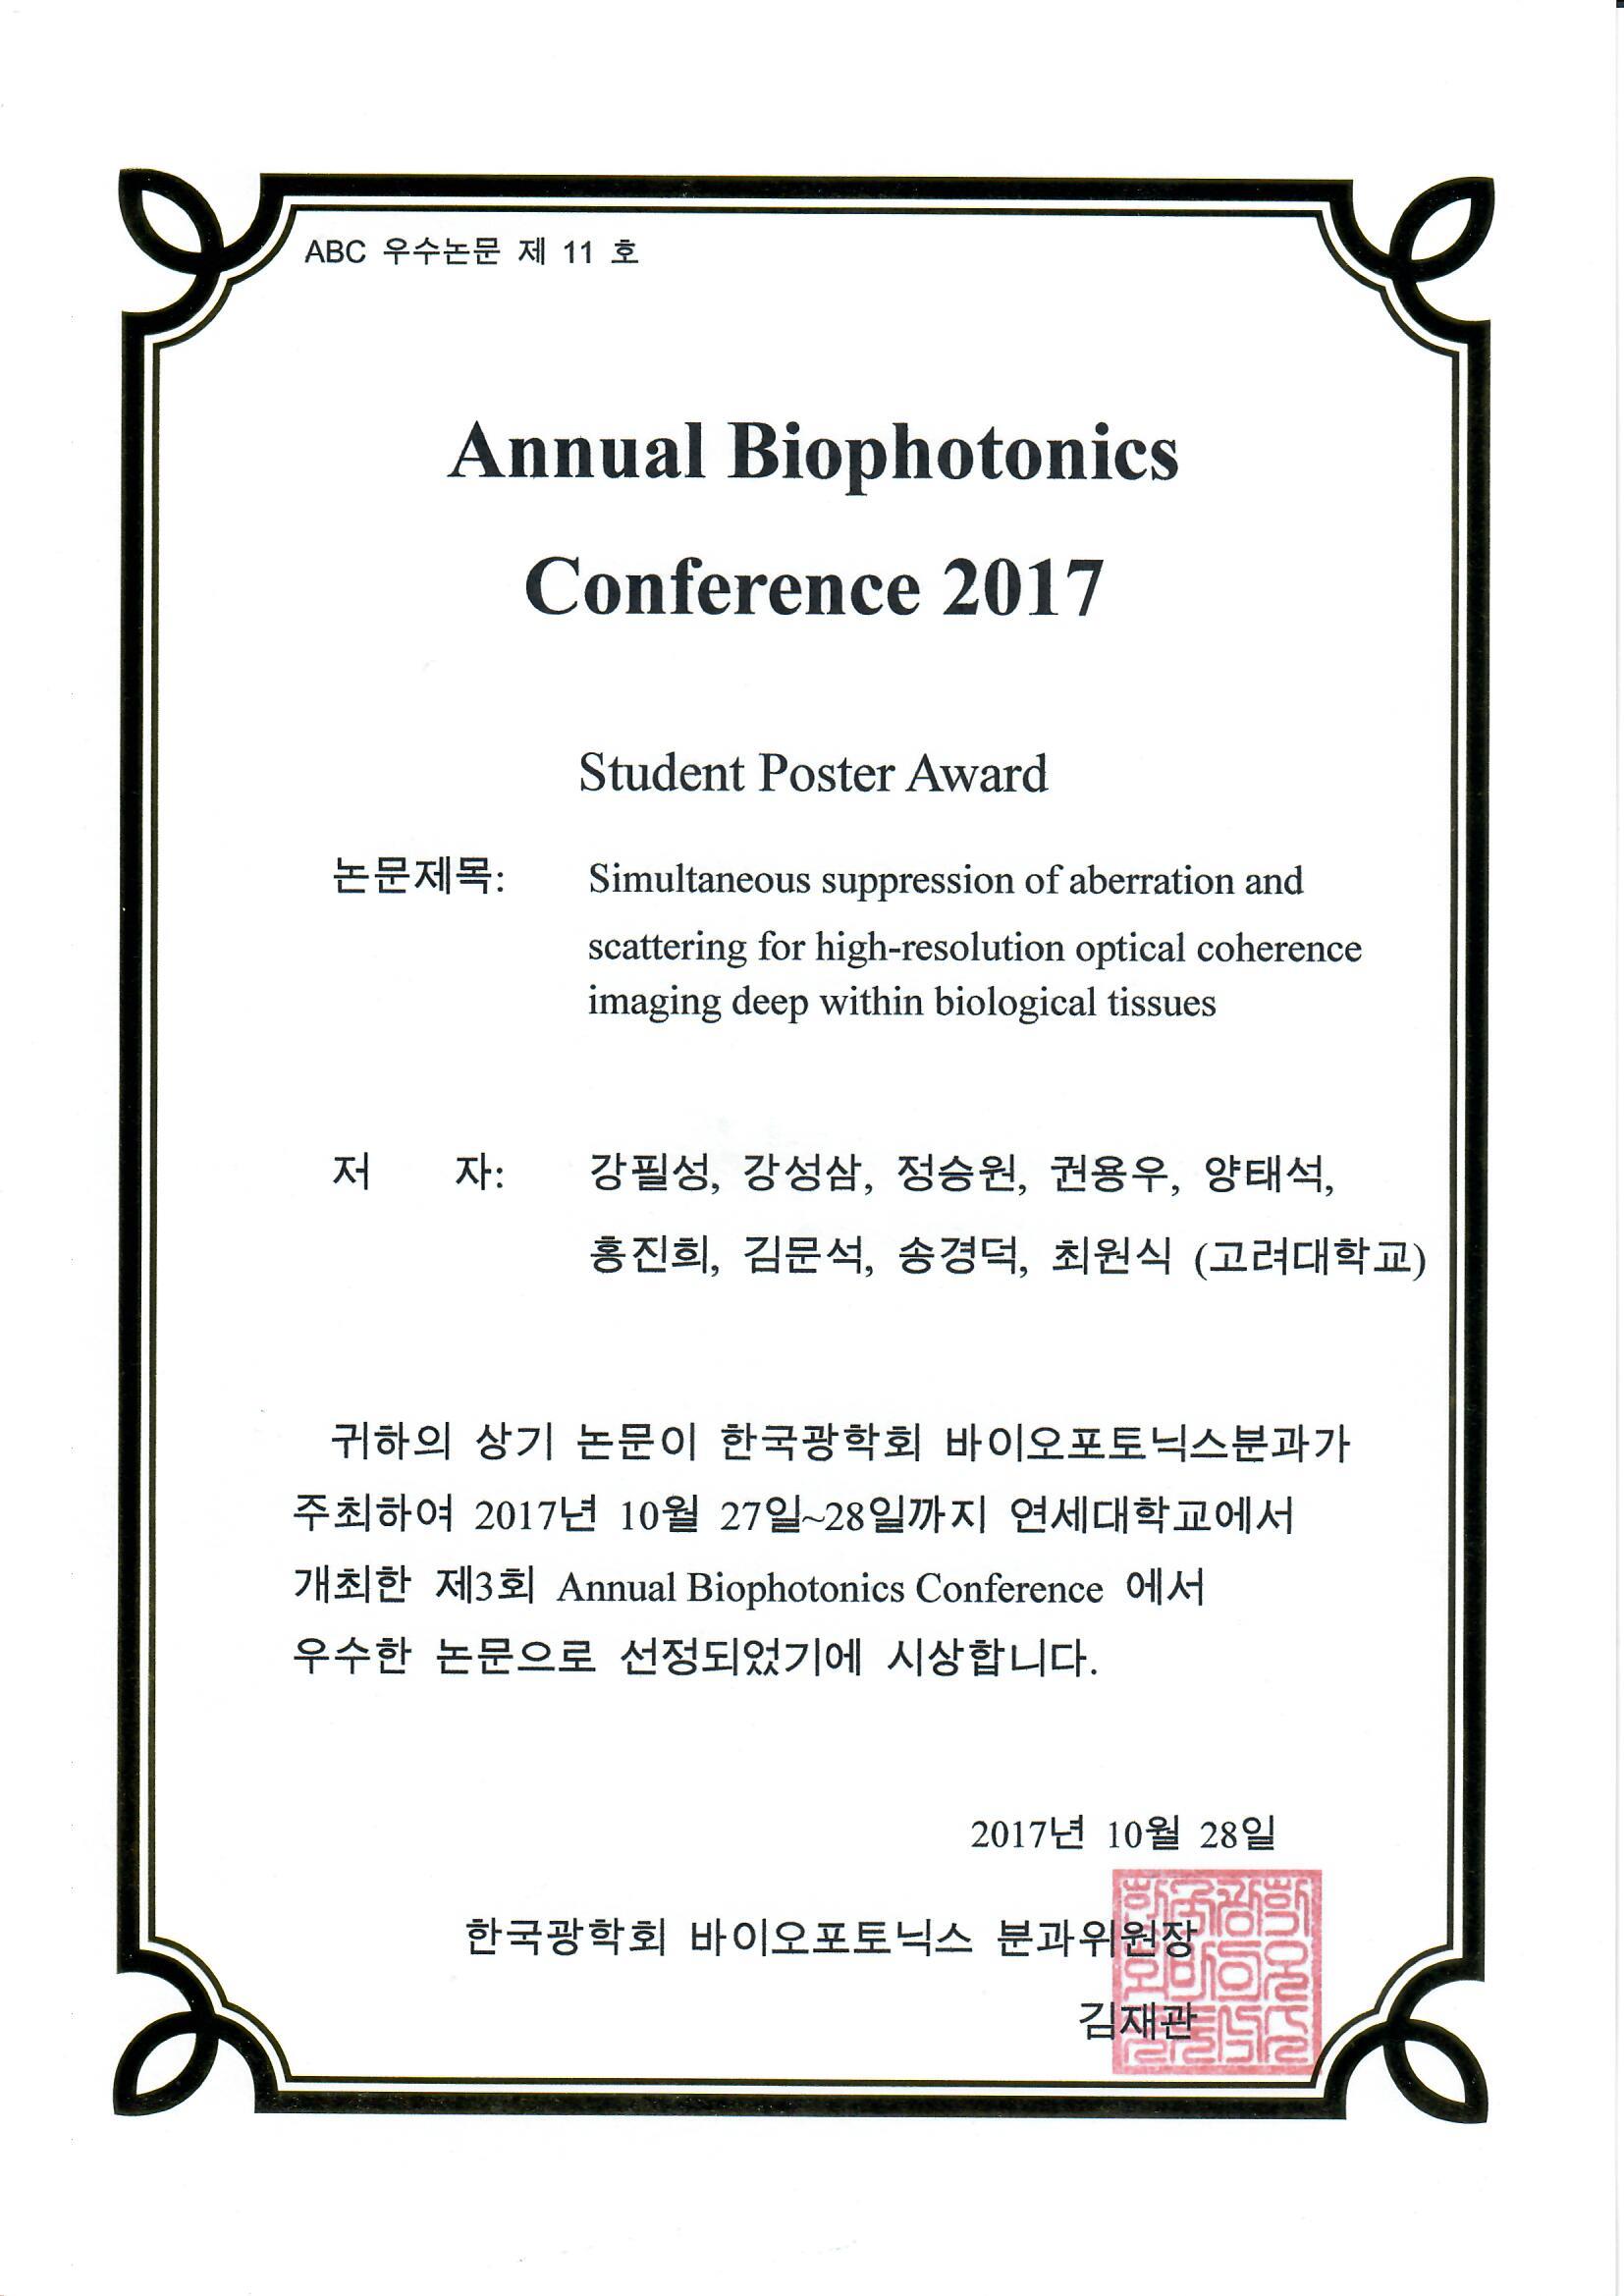 Student Poster Award from ABC 2017(Pilsung Kang)